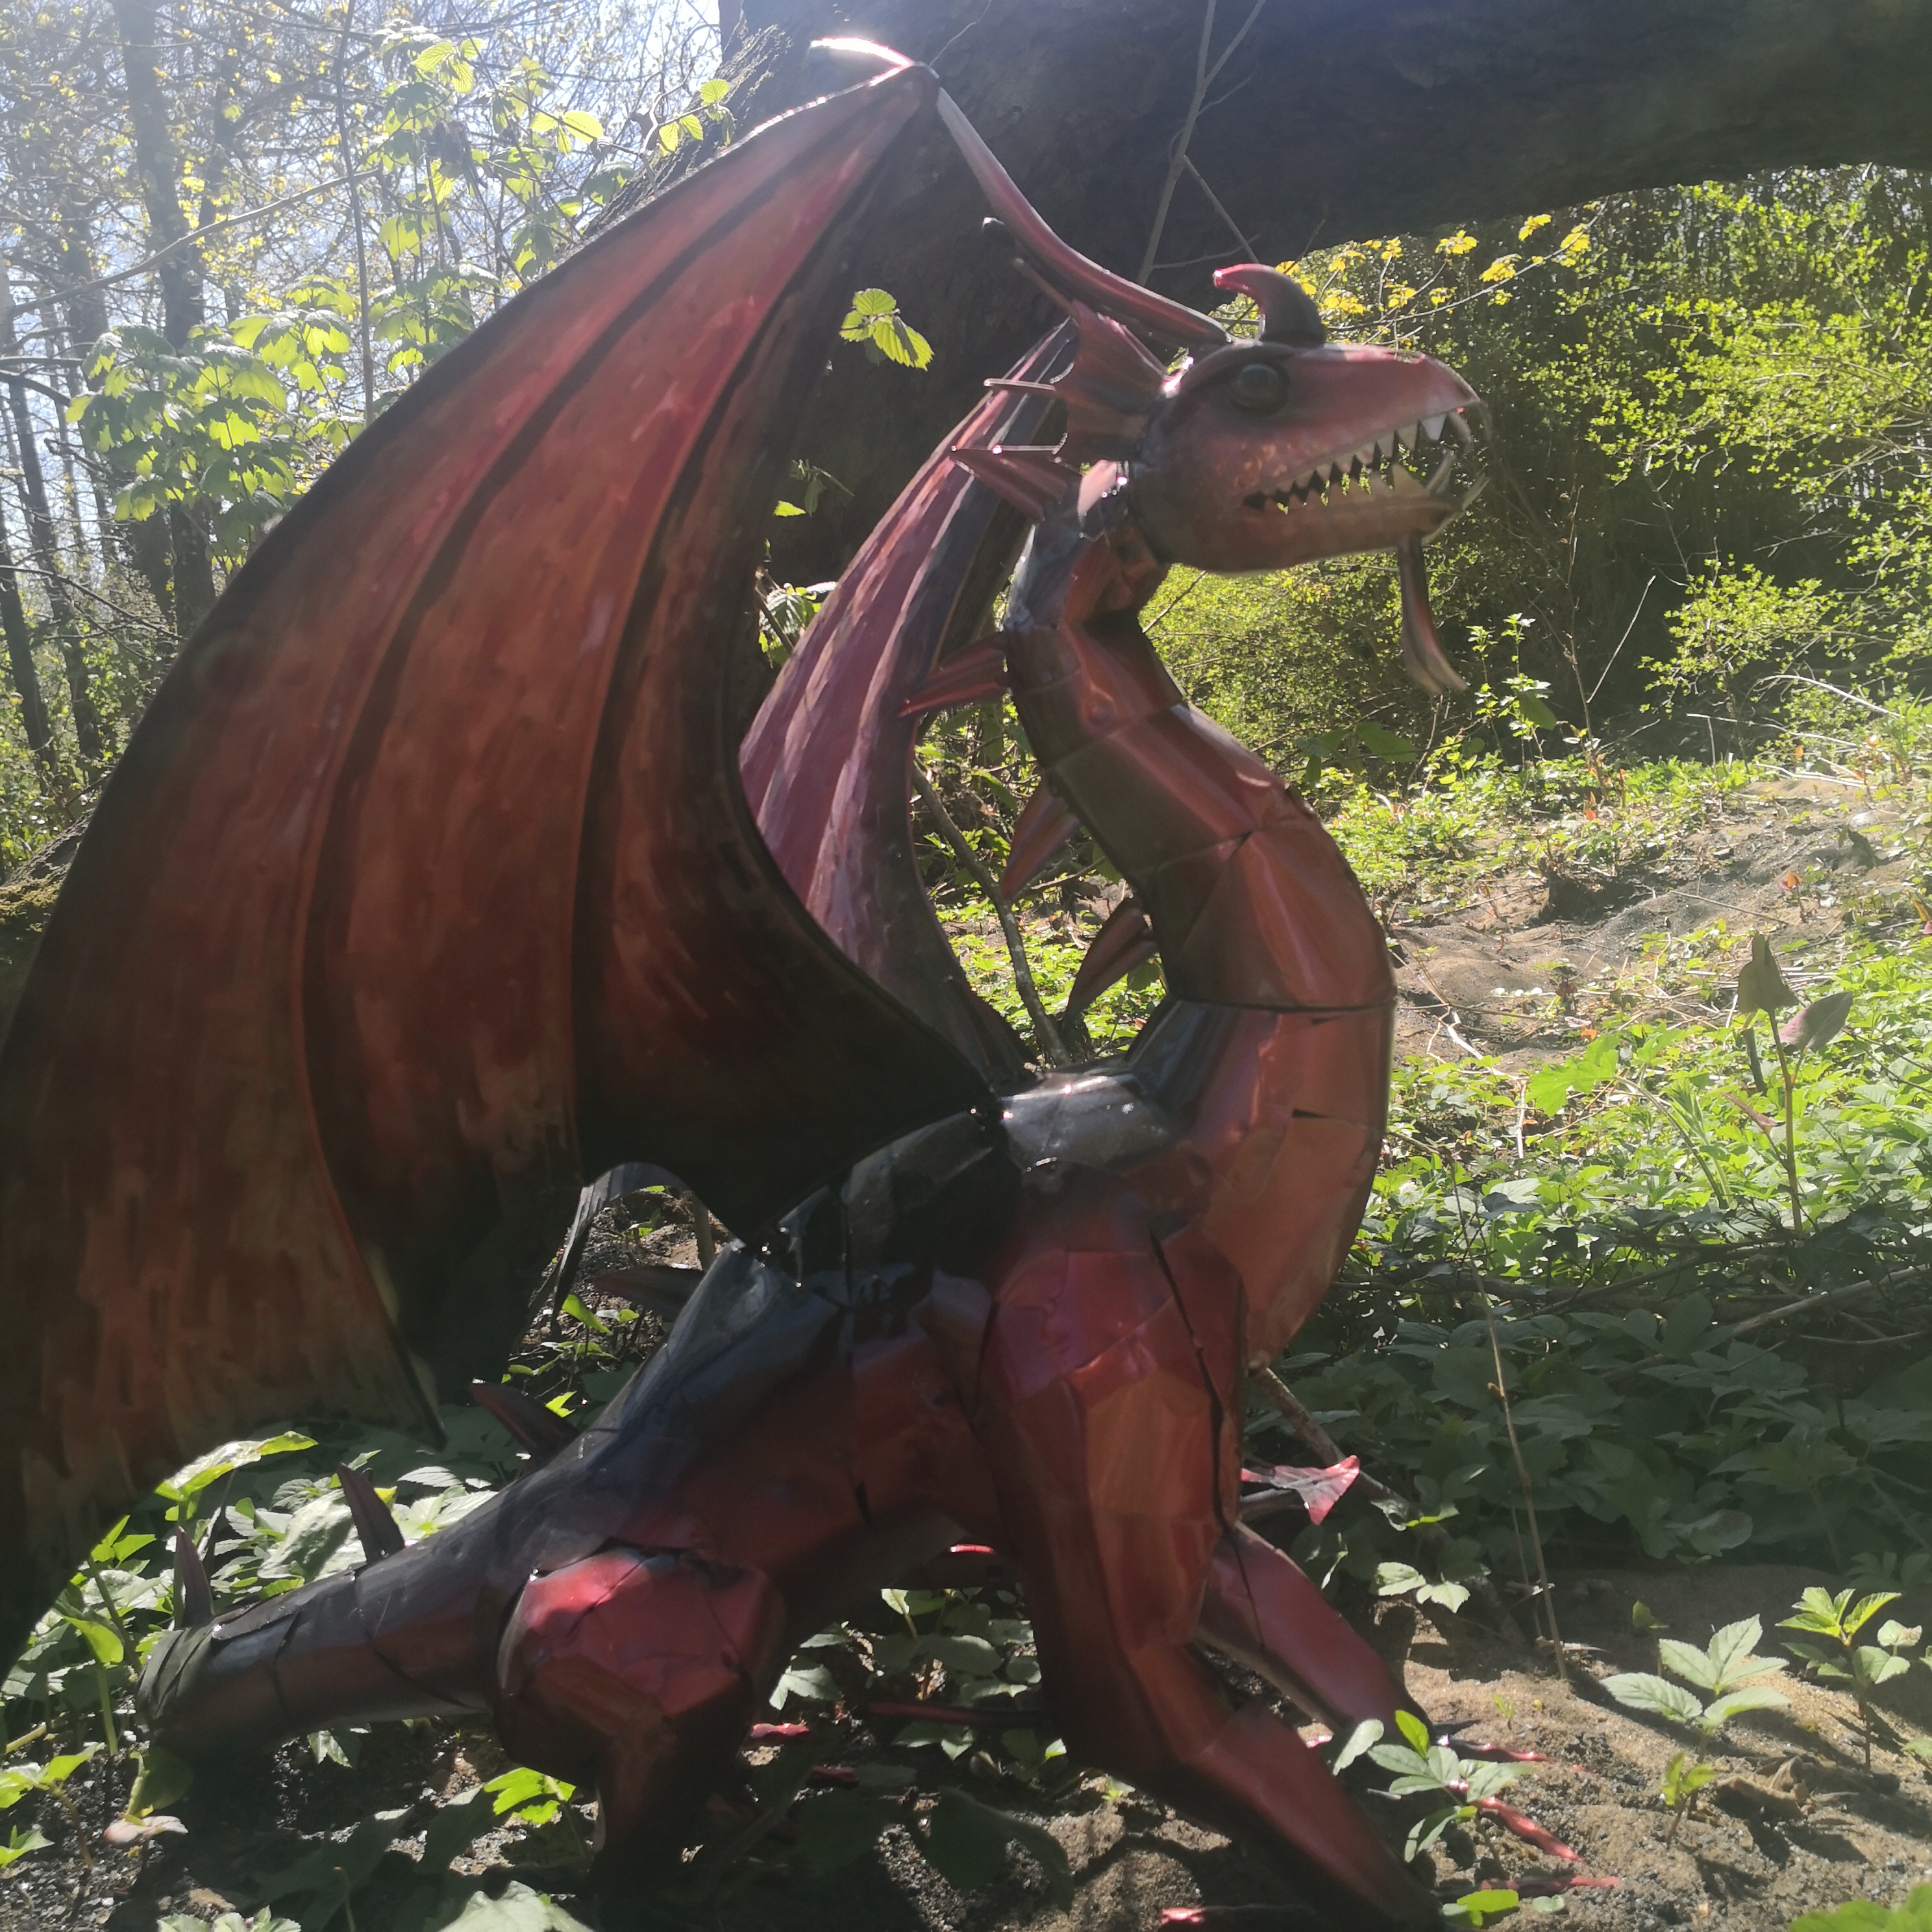 A photo of a wooden dragon